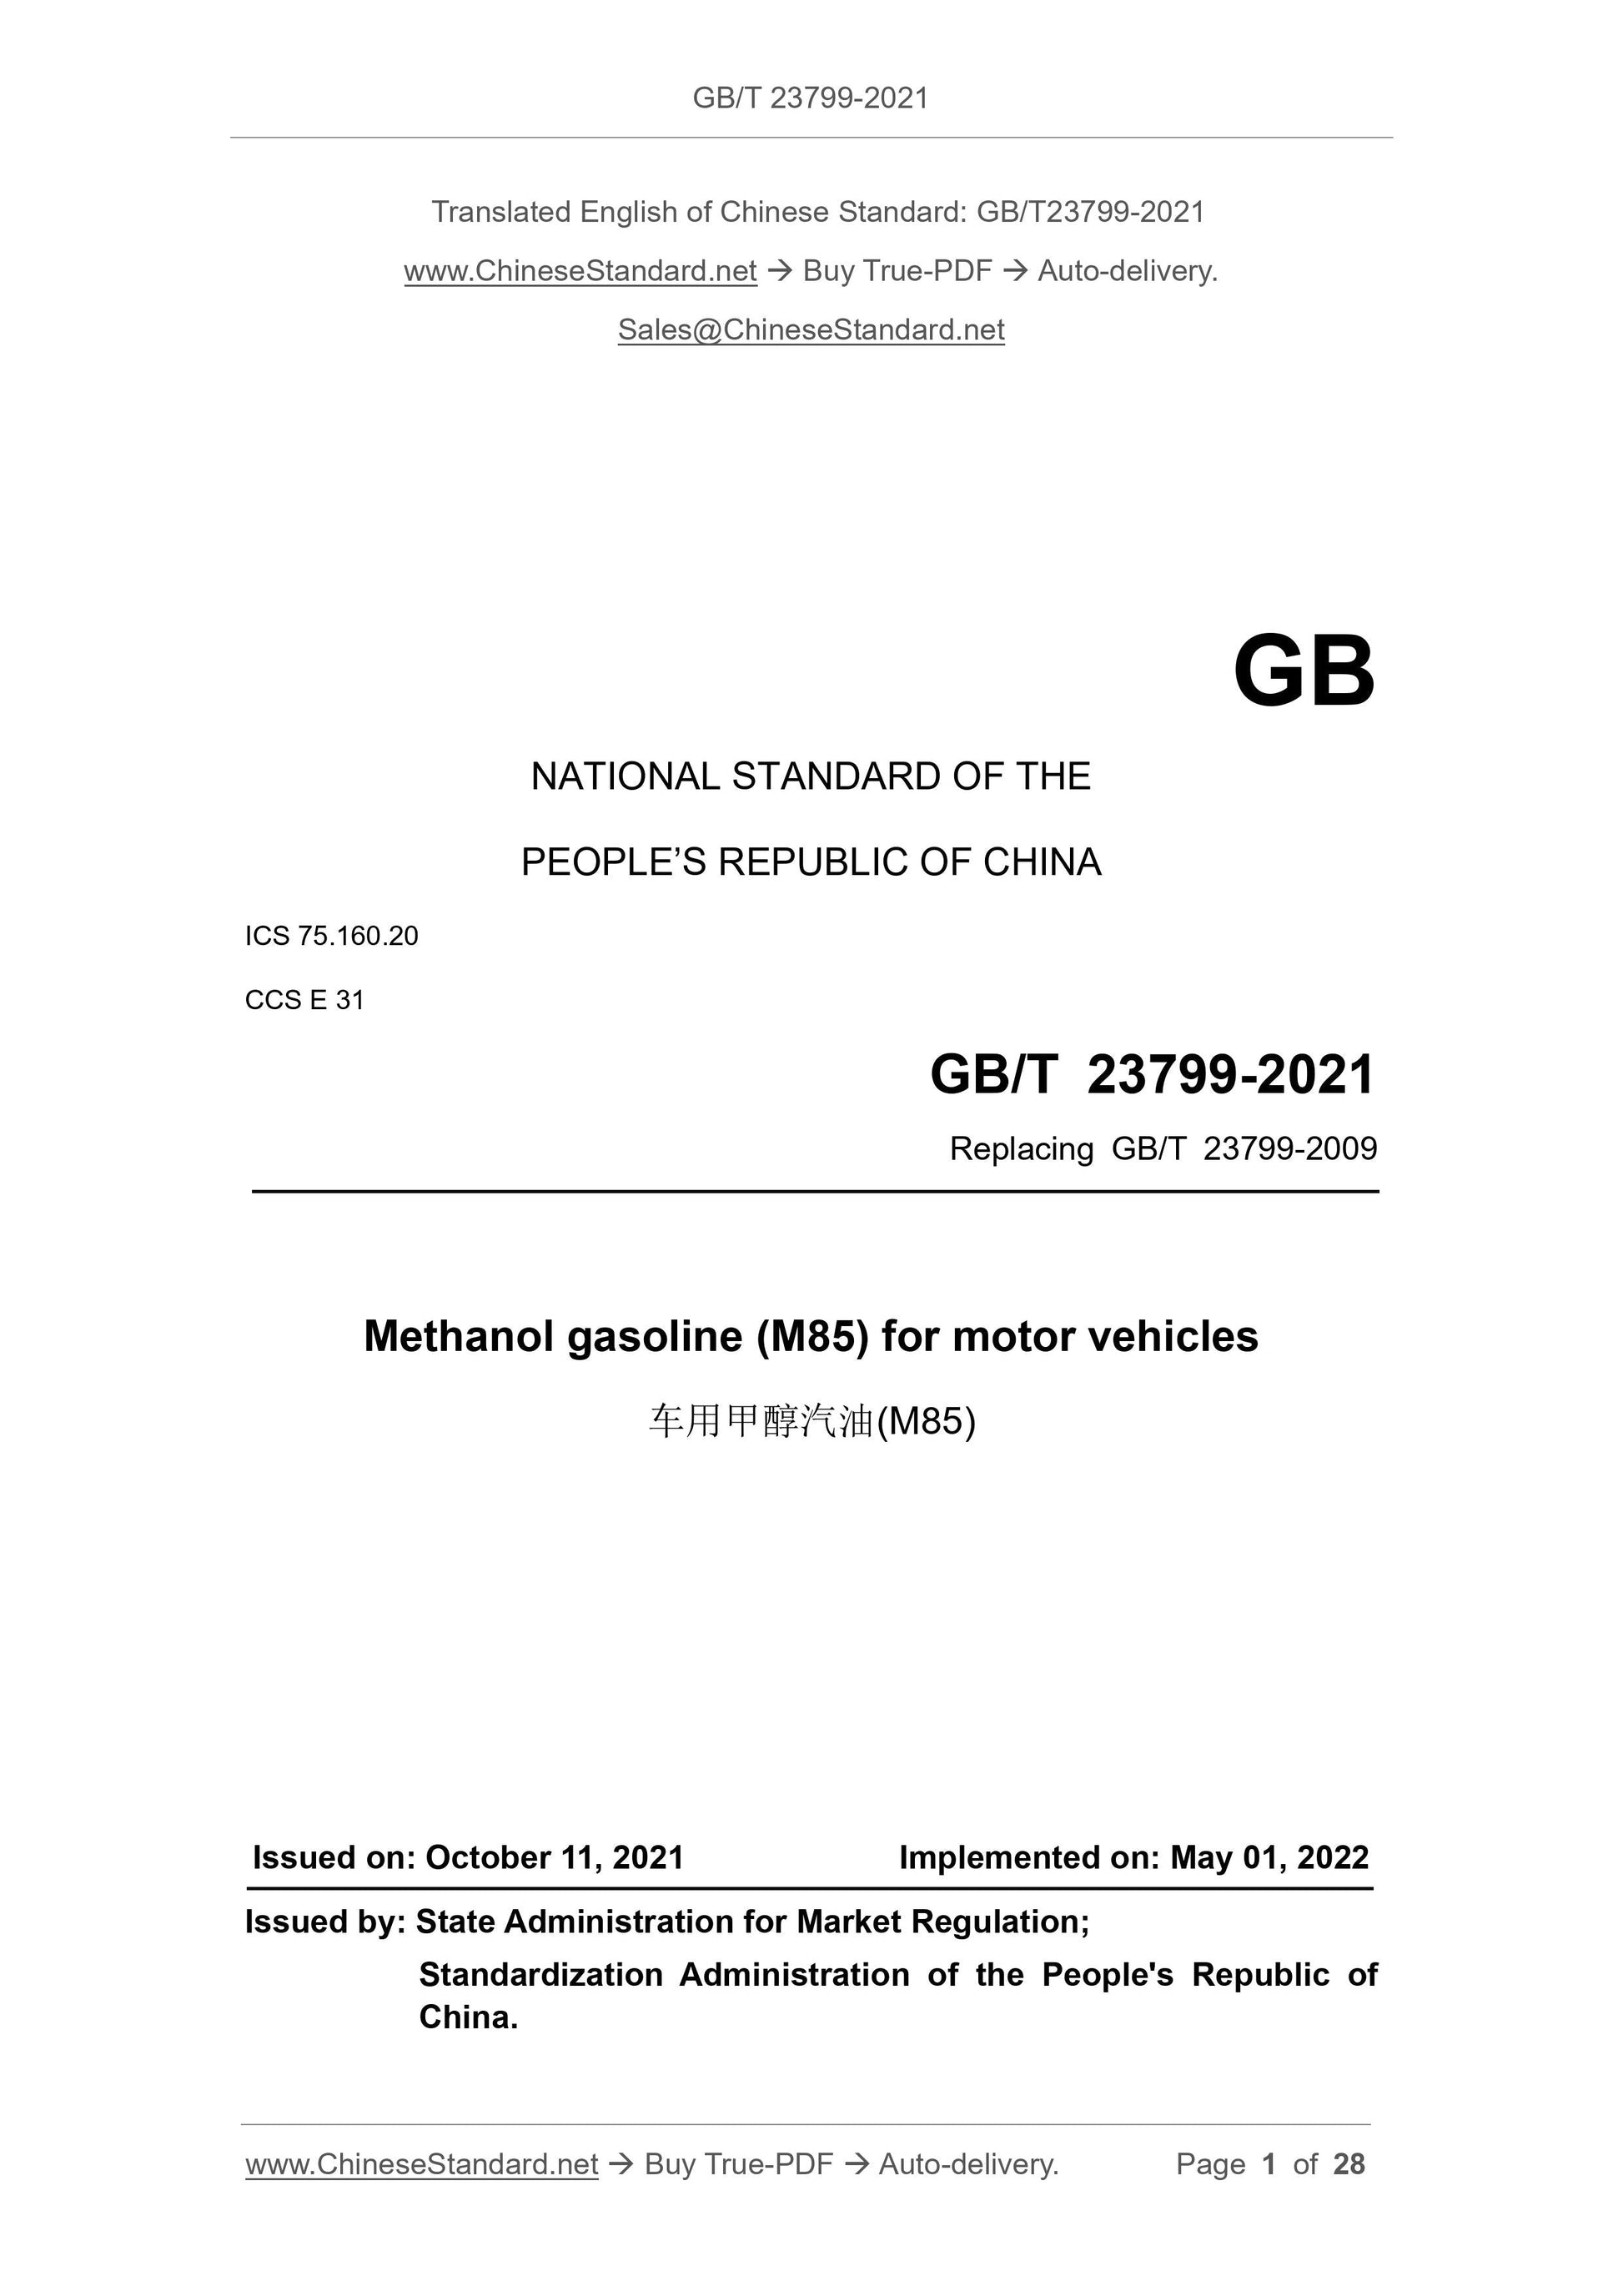 GB/T 23799-2021 Page 1